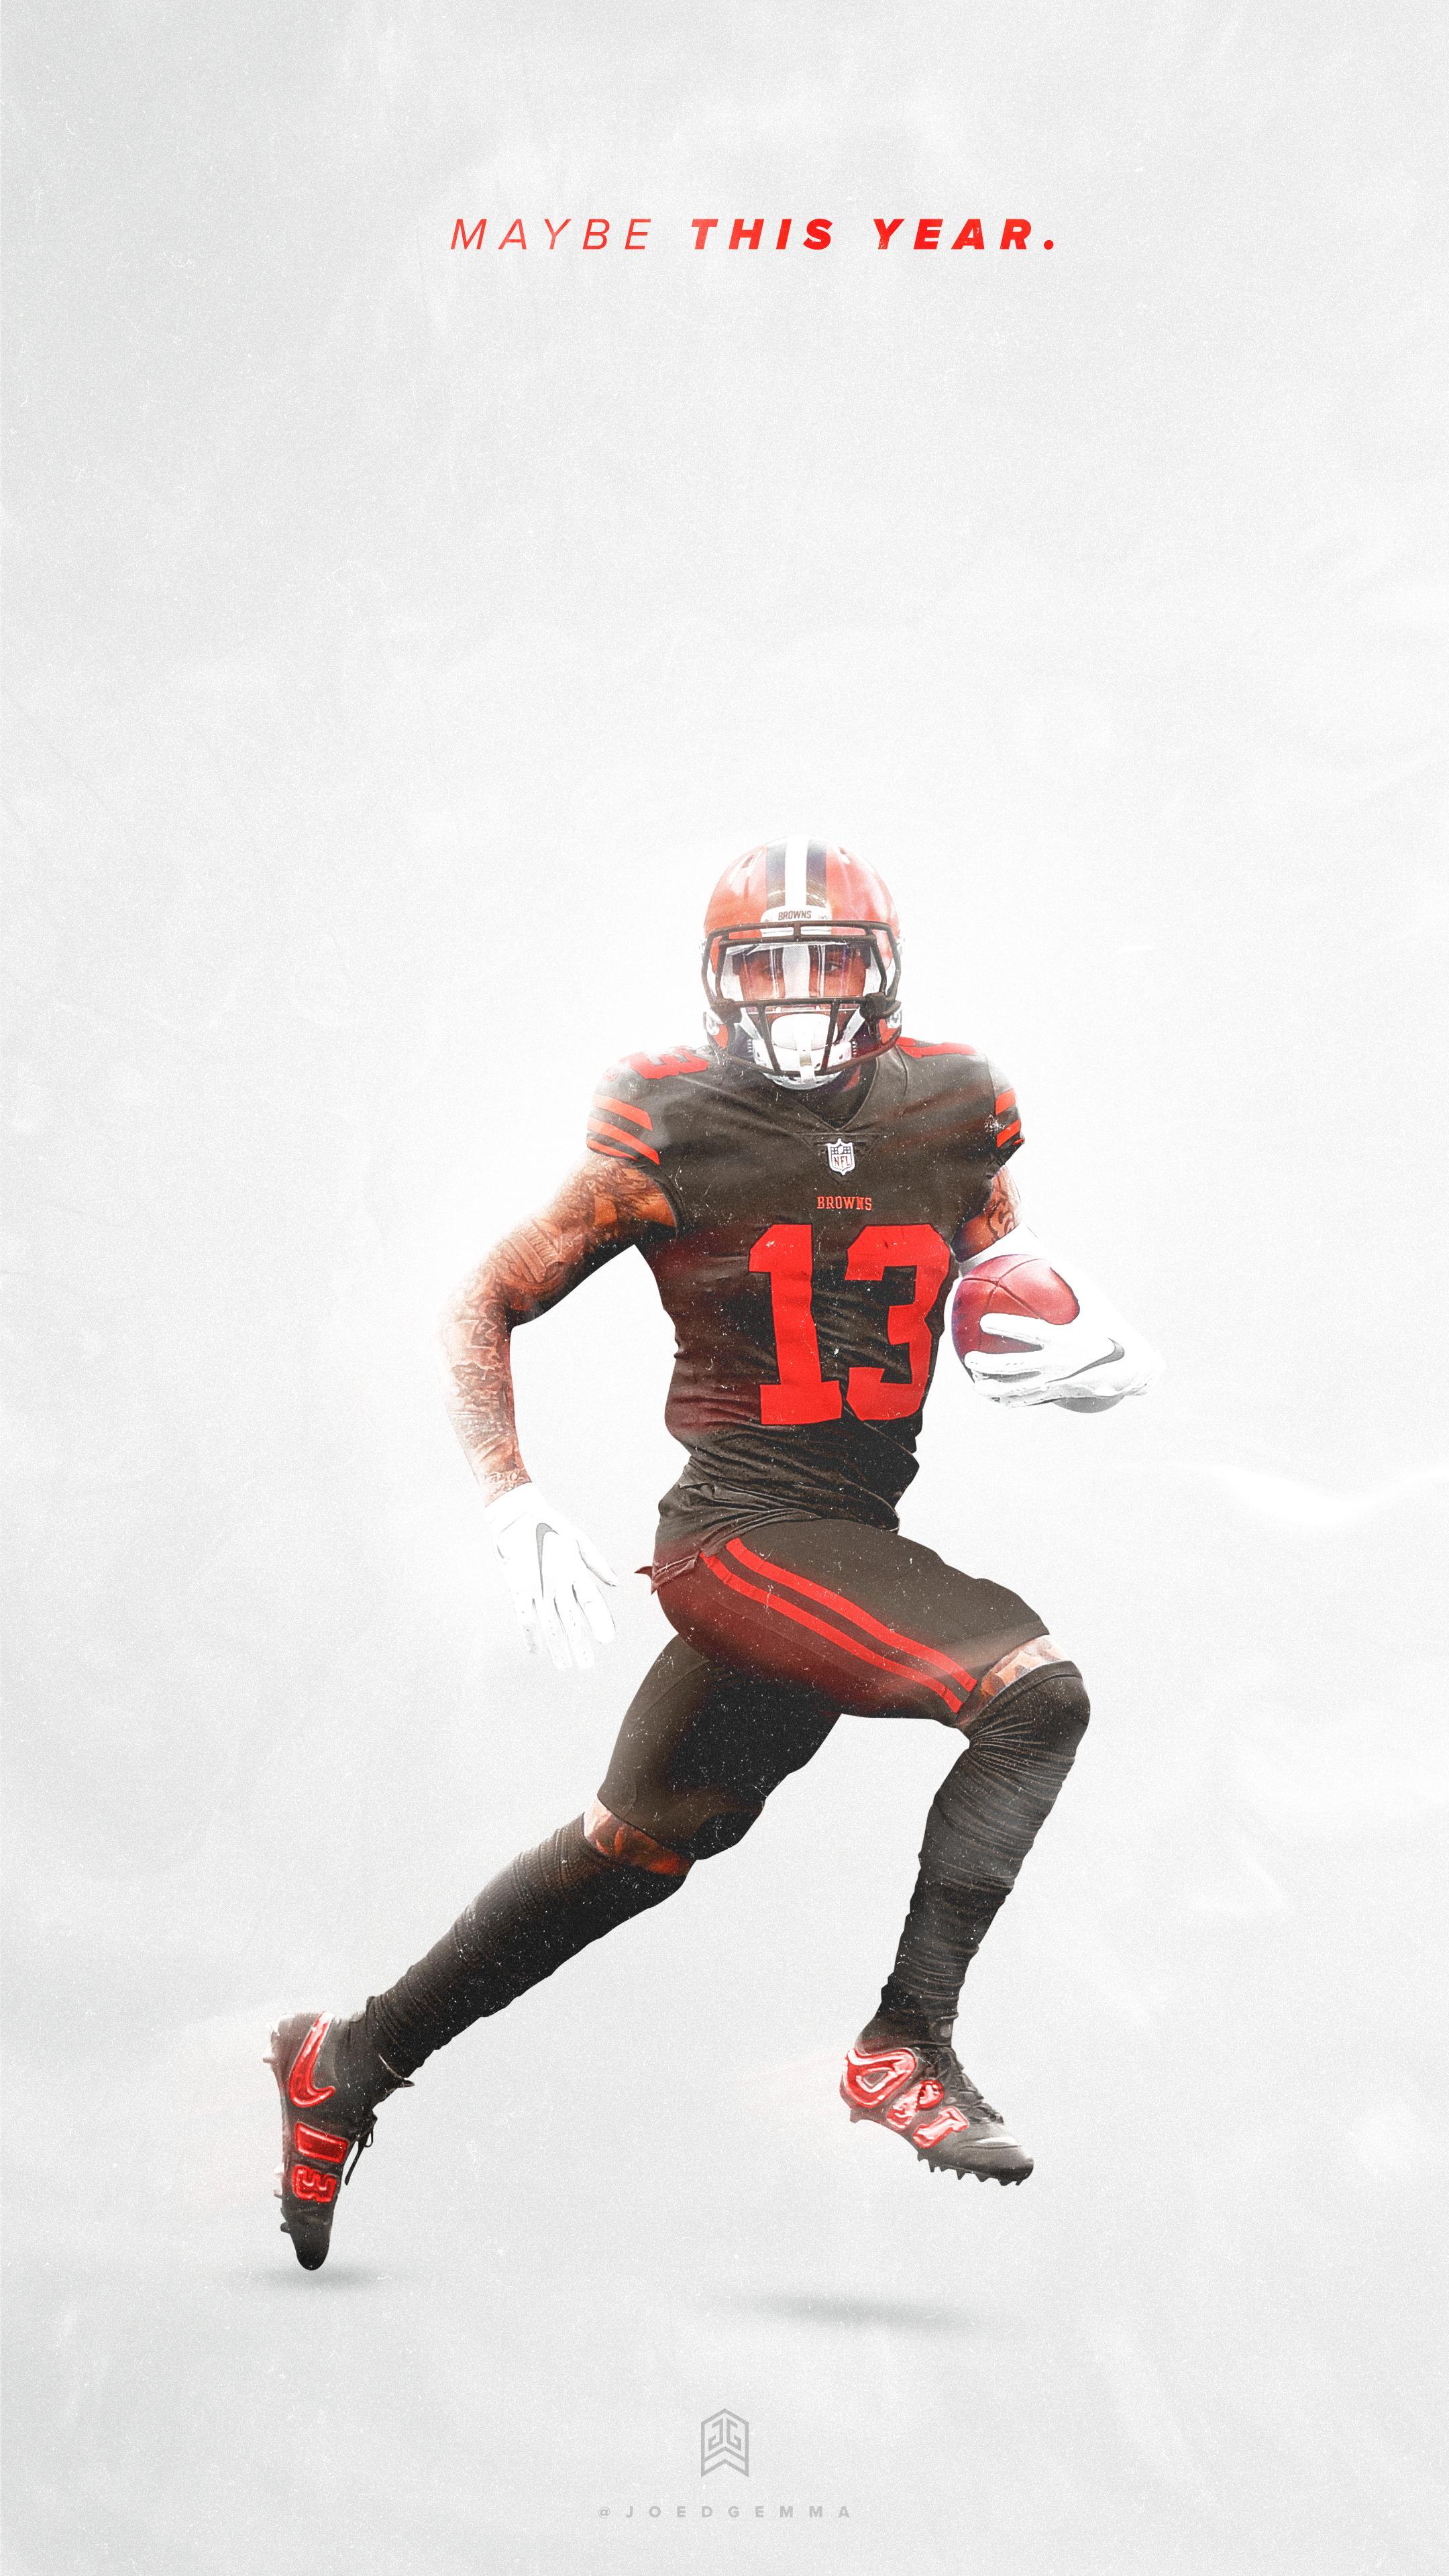 obj cleveland browns wallpapers wallpaper cave on obj cleveland browns wallpapers